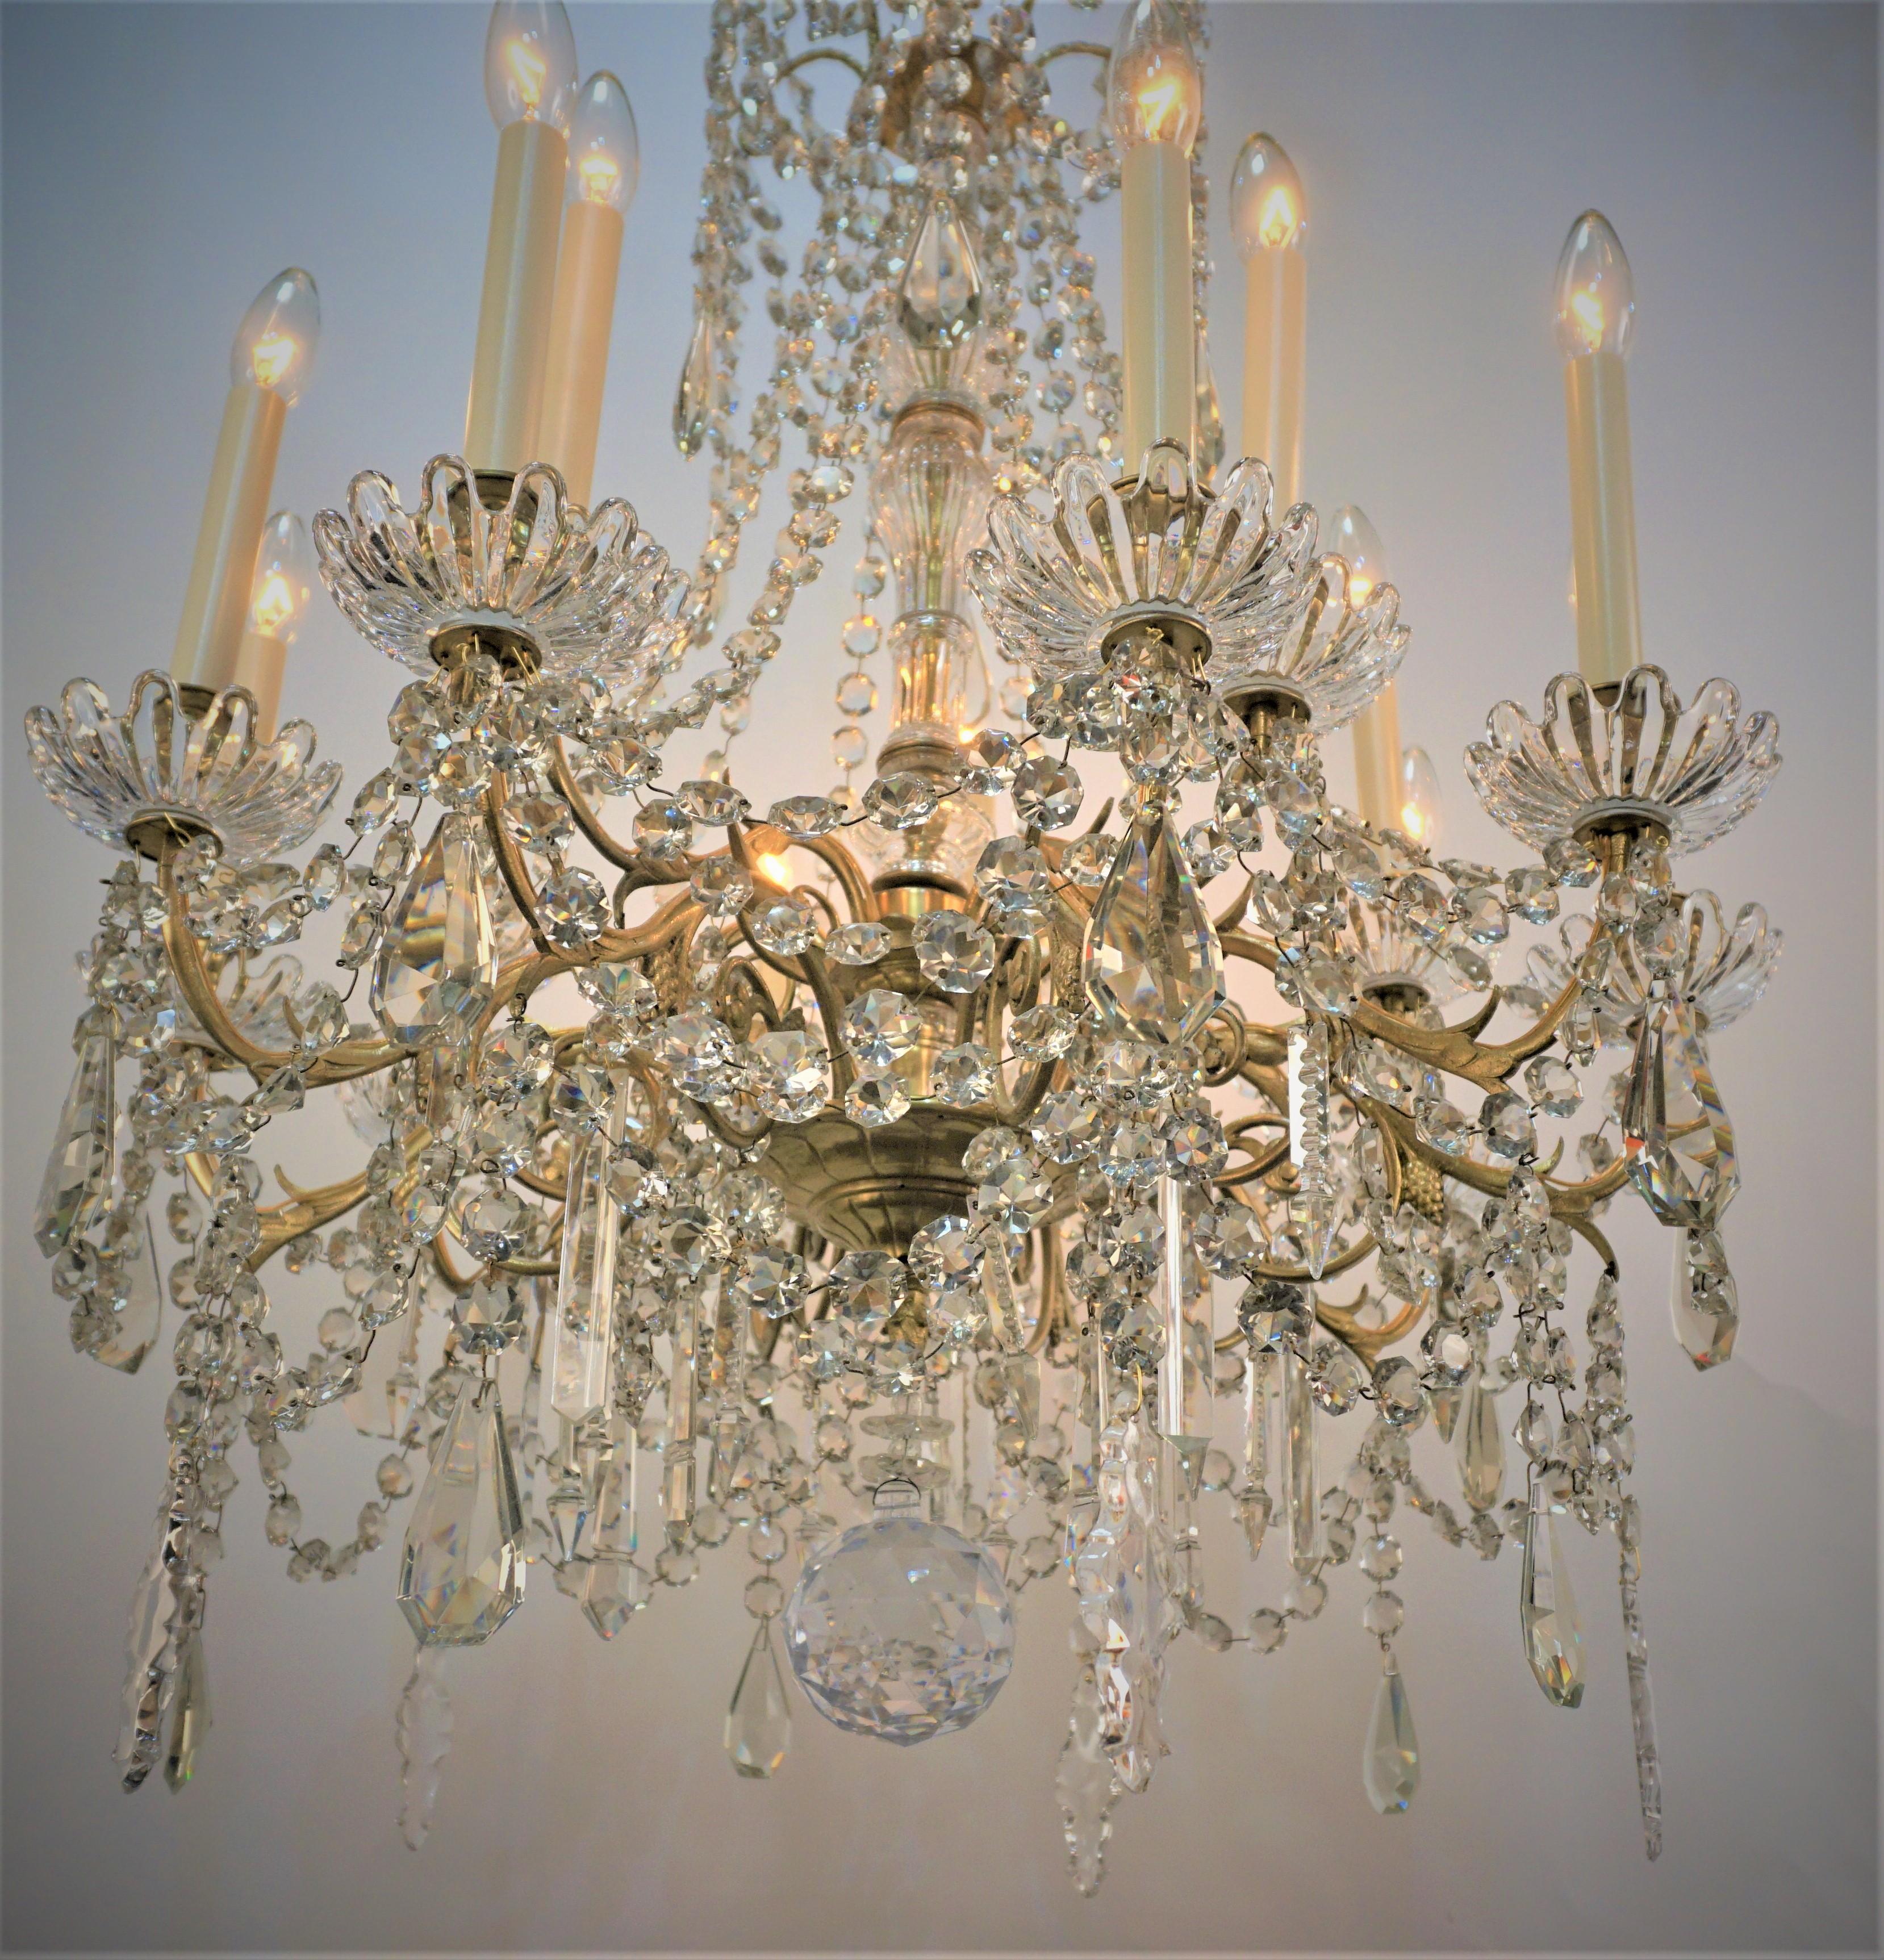 19th century fifteen light signed Baccarat crystal and bronze chandelier.
Professionally rewired and ready for installation.
Measurement: width 30